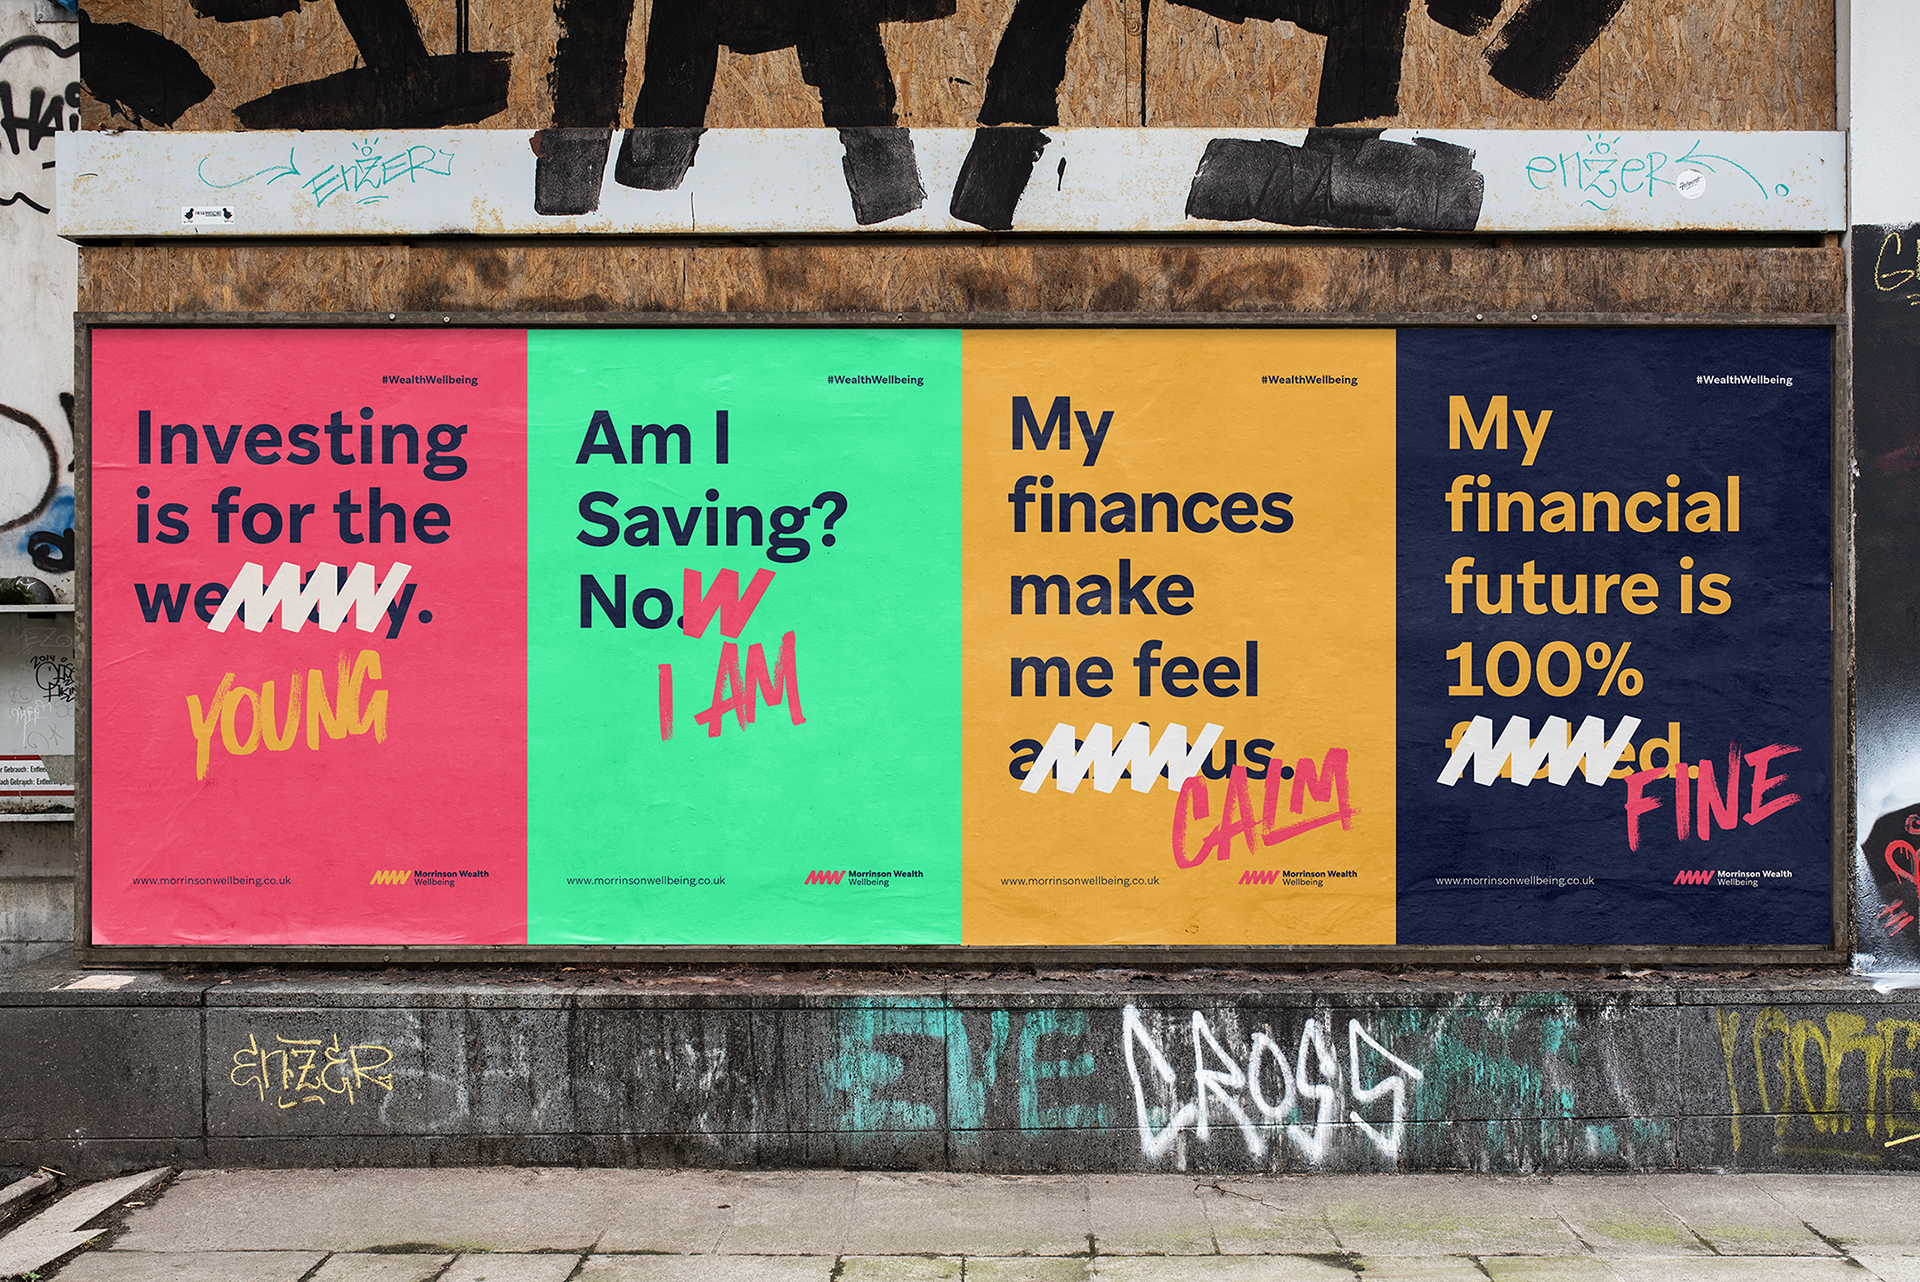 Morrinson Wealth campaign posters